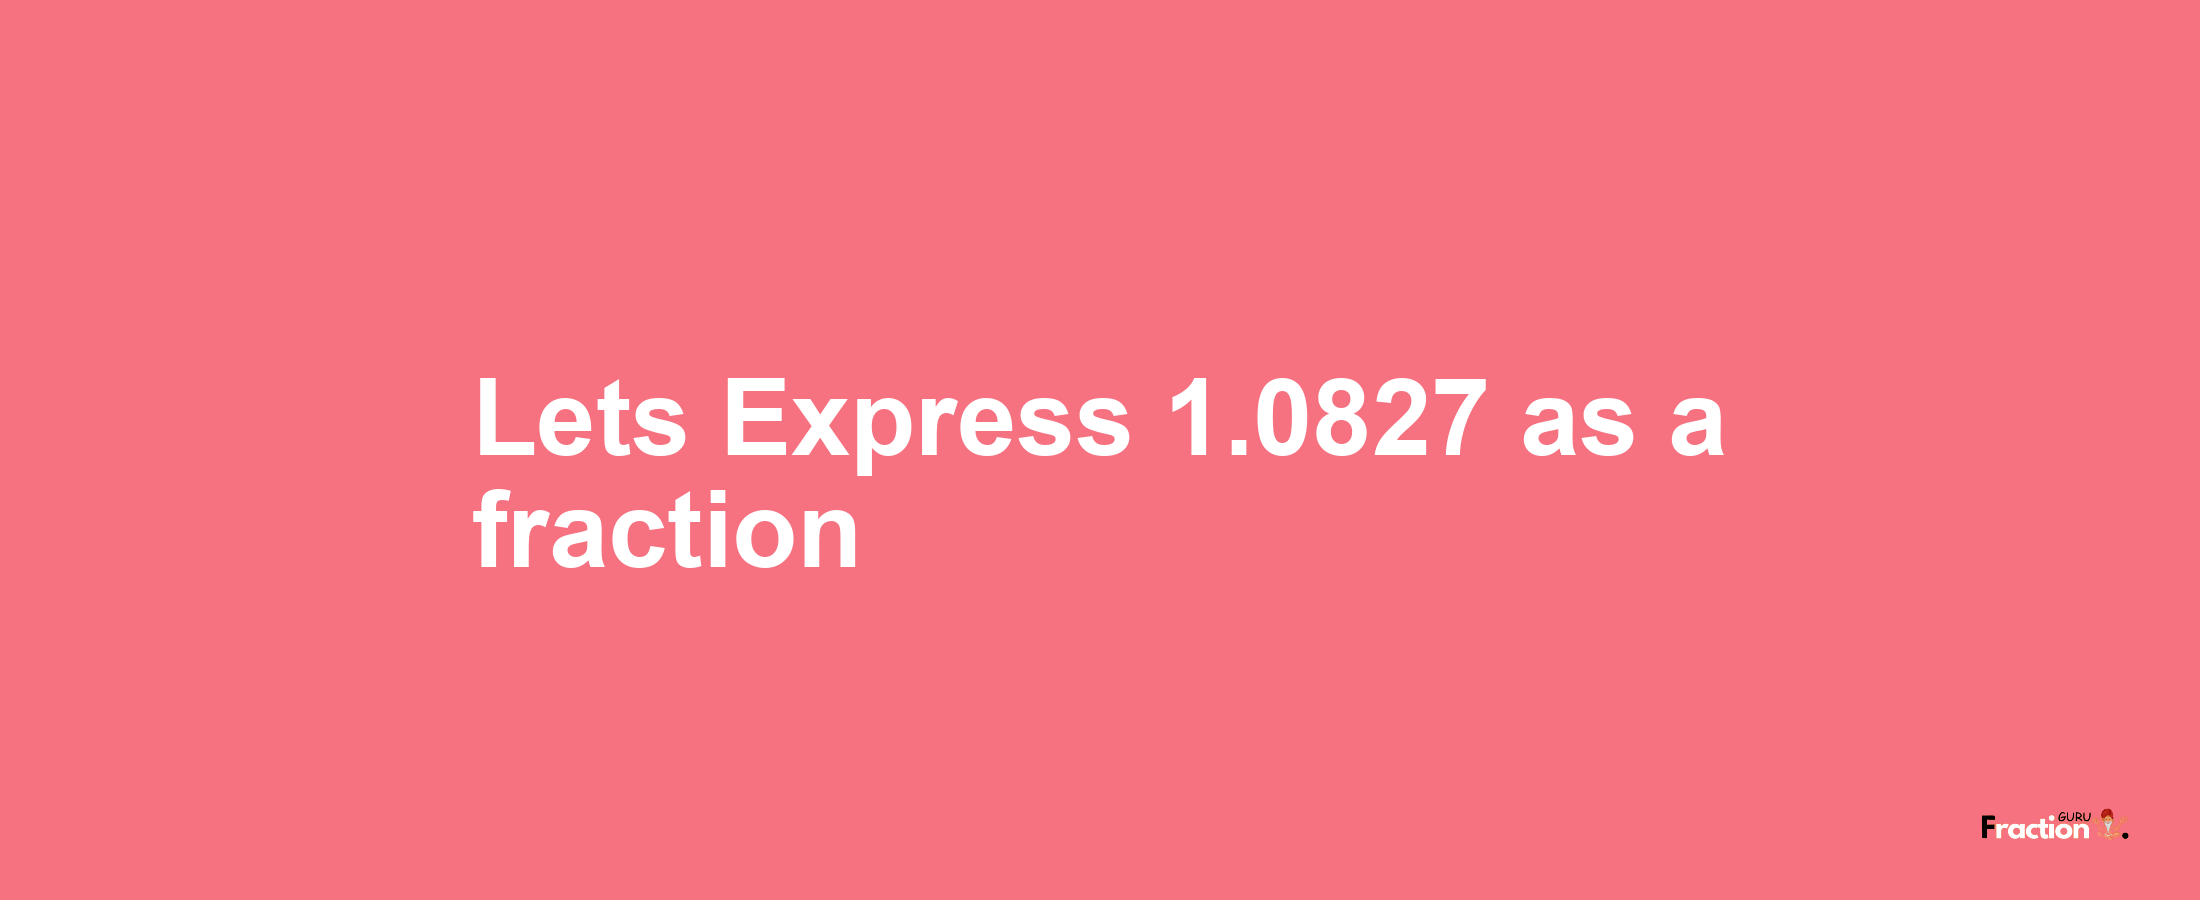 Lets Express 1.0827 as afraction